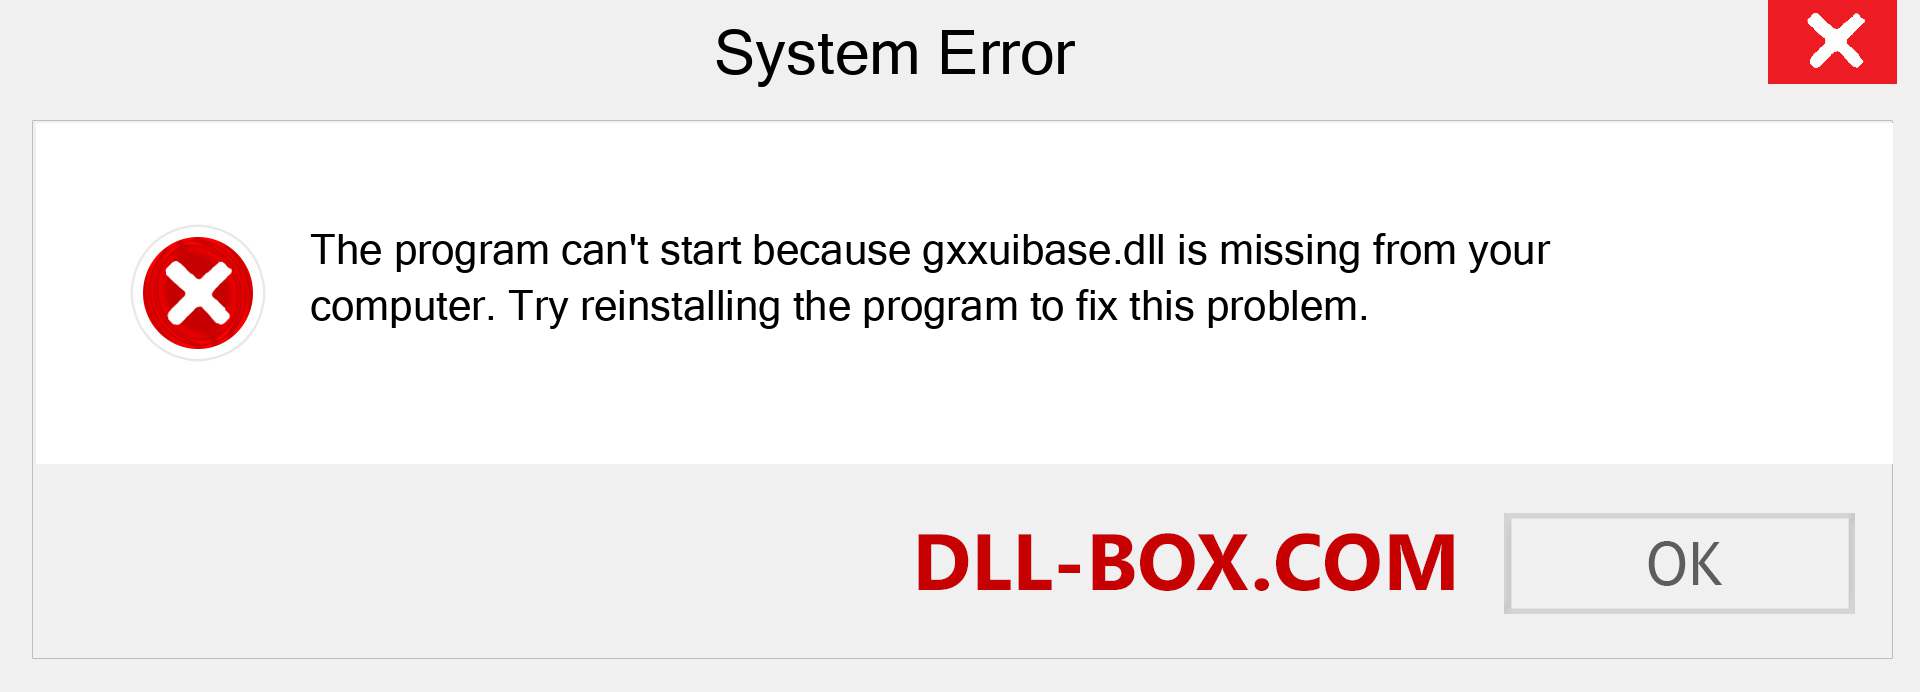  gxxuibase.dll file is missing?. Download for Windows 7, 8, 10 - Fix  gxxuibase dll Missing Error on Windows, photos, images